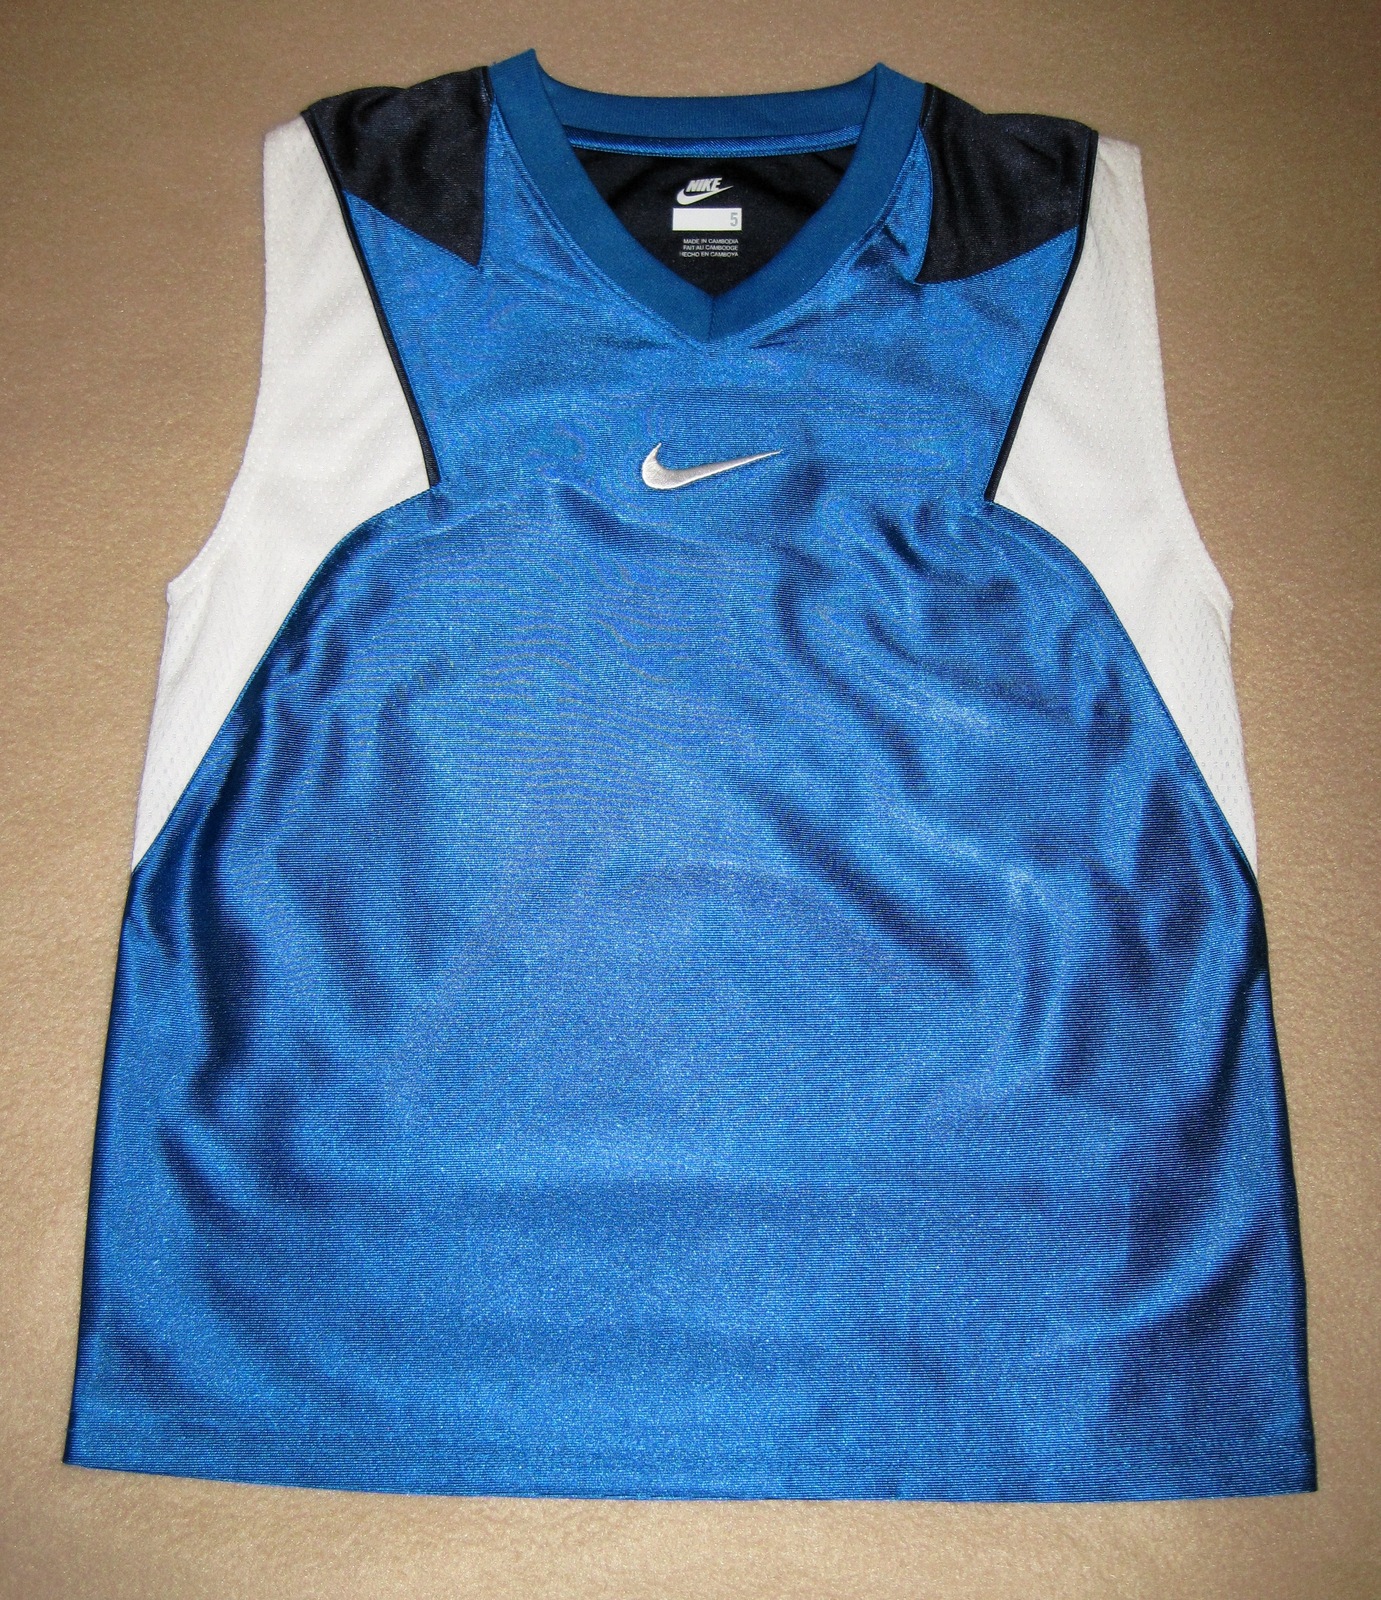 Primary image for BOYS 6 - Nike - Flight Electric Blue BASKETBALL SPORTS JERSEY